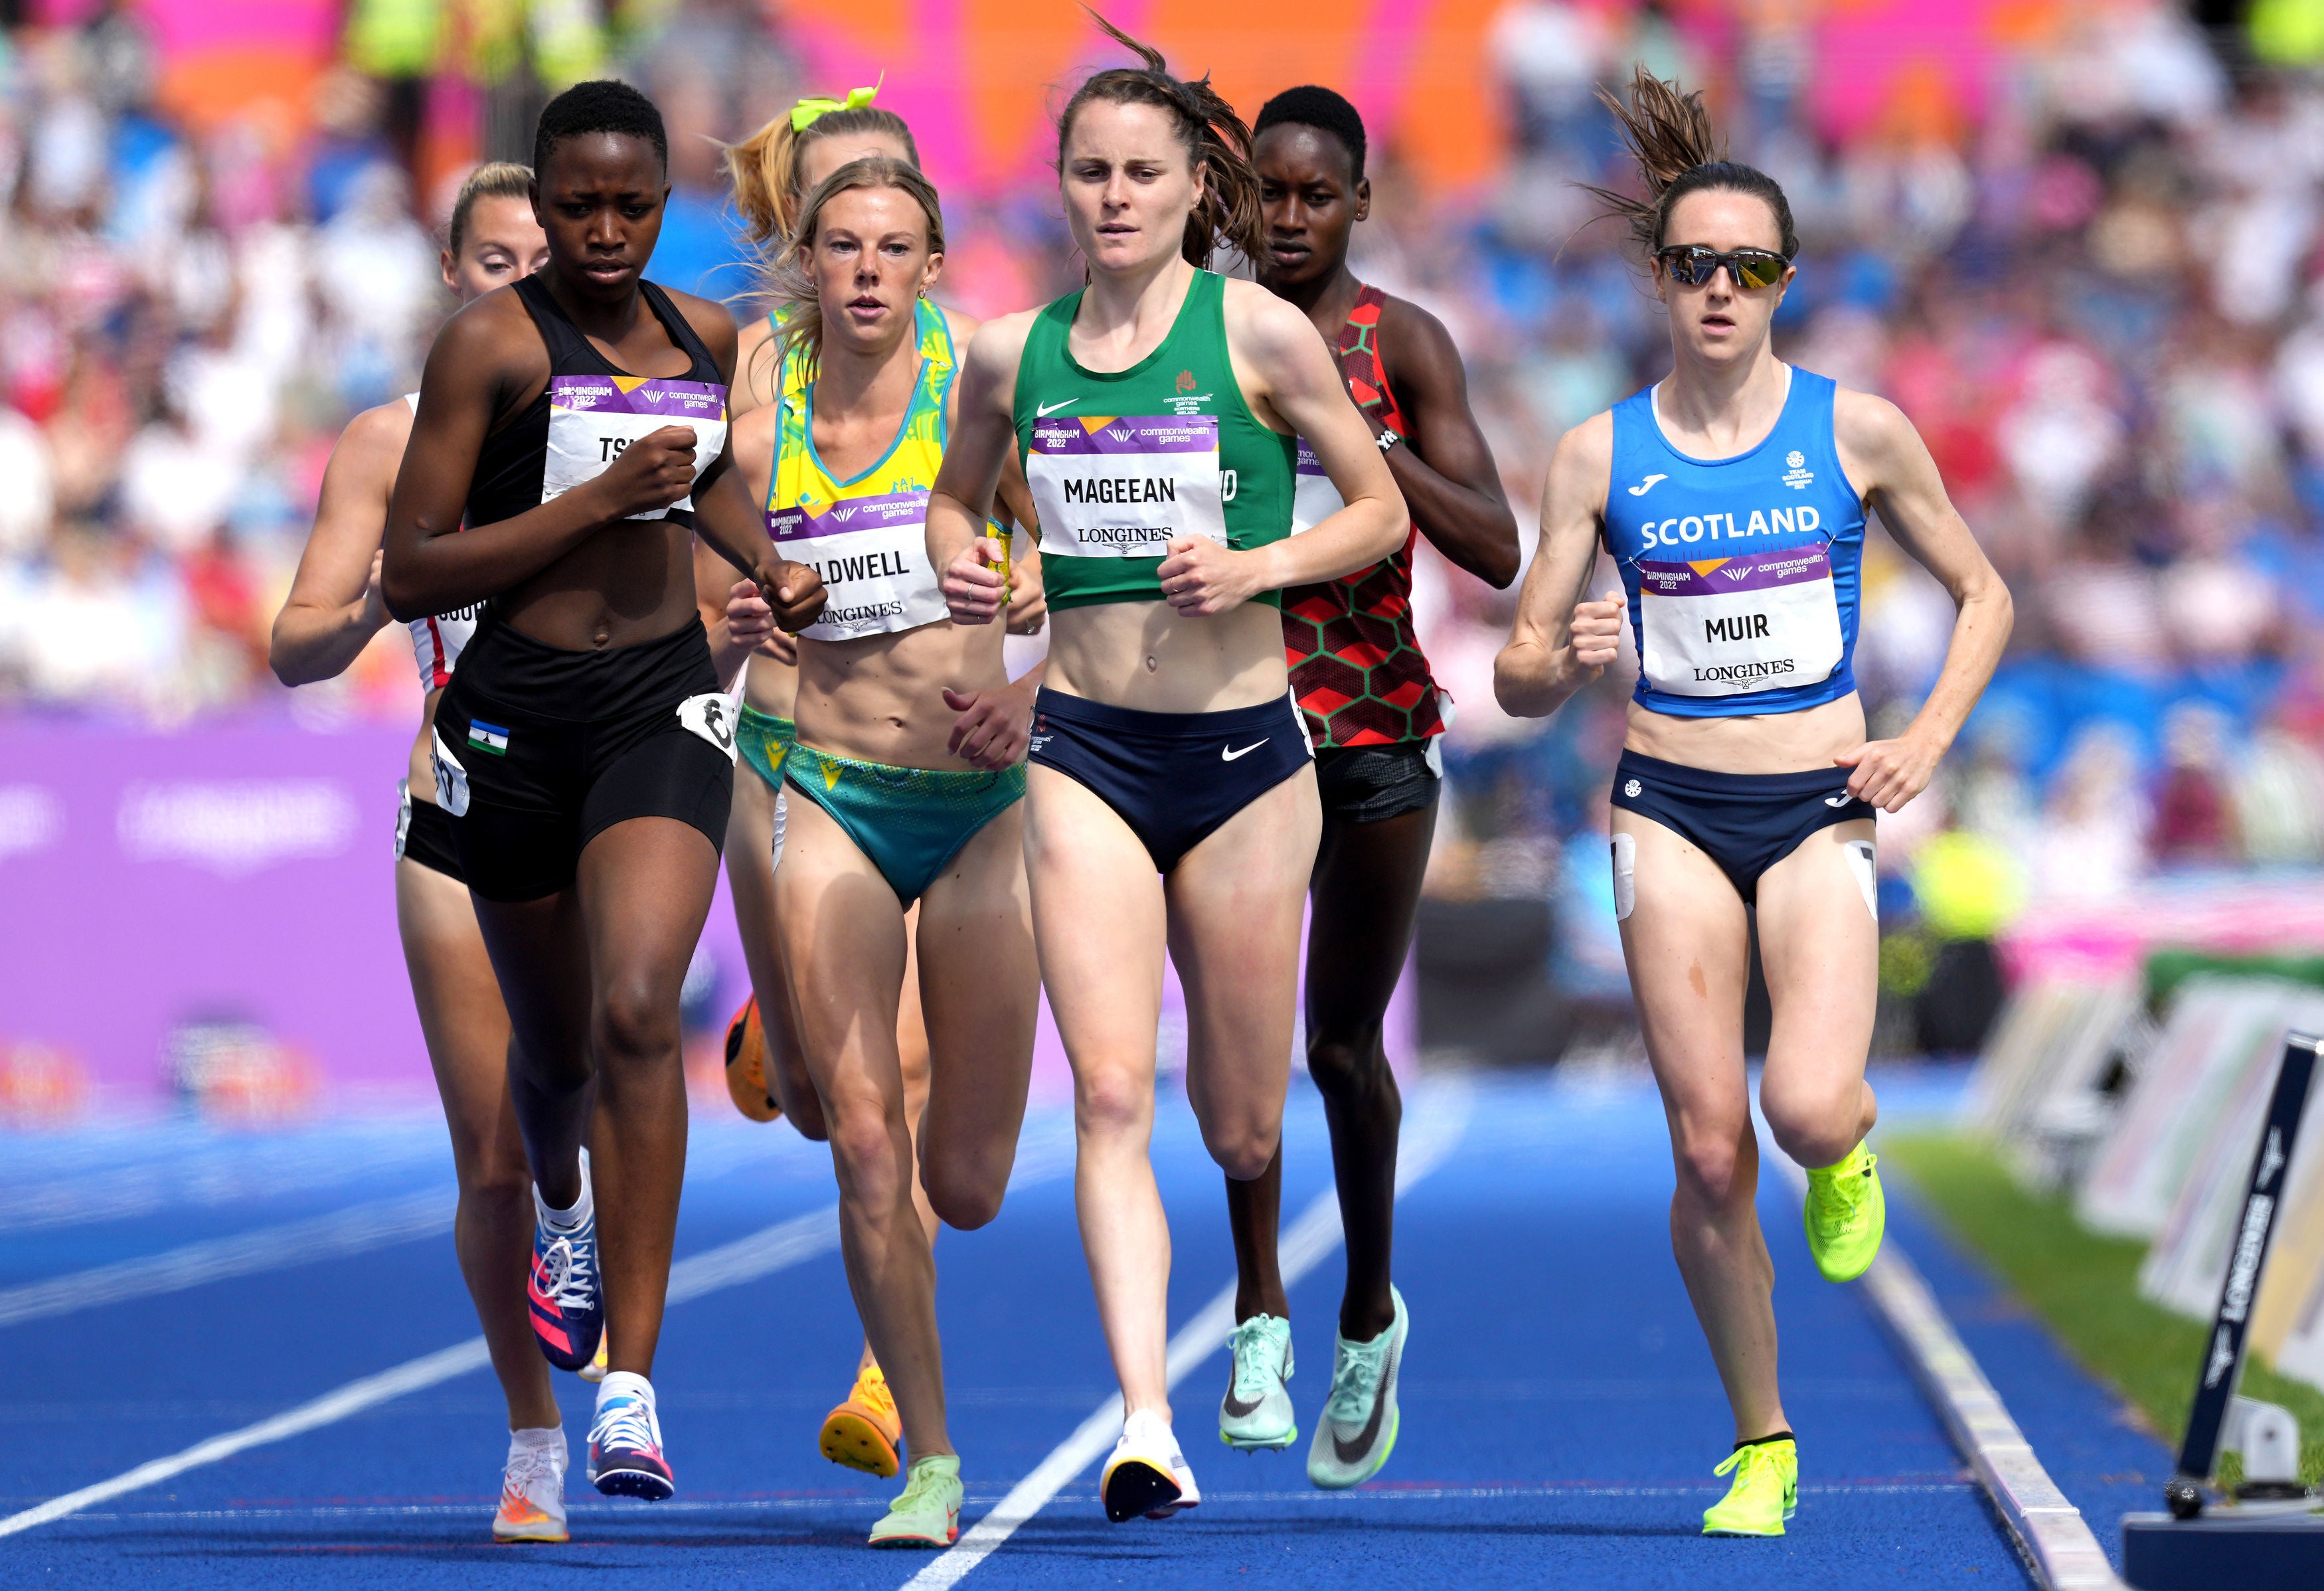 Laura Muir of Team Scotland competes during the Women's 1500m Round 1 heats